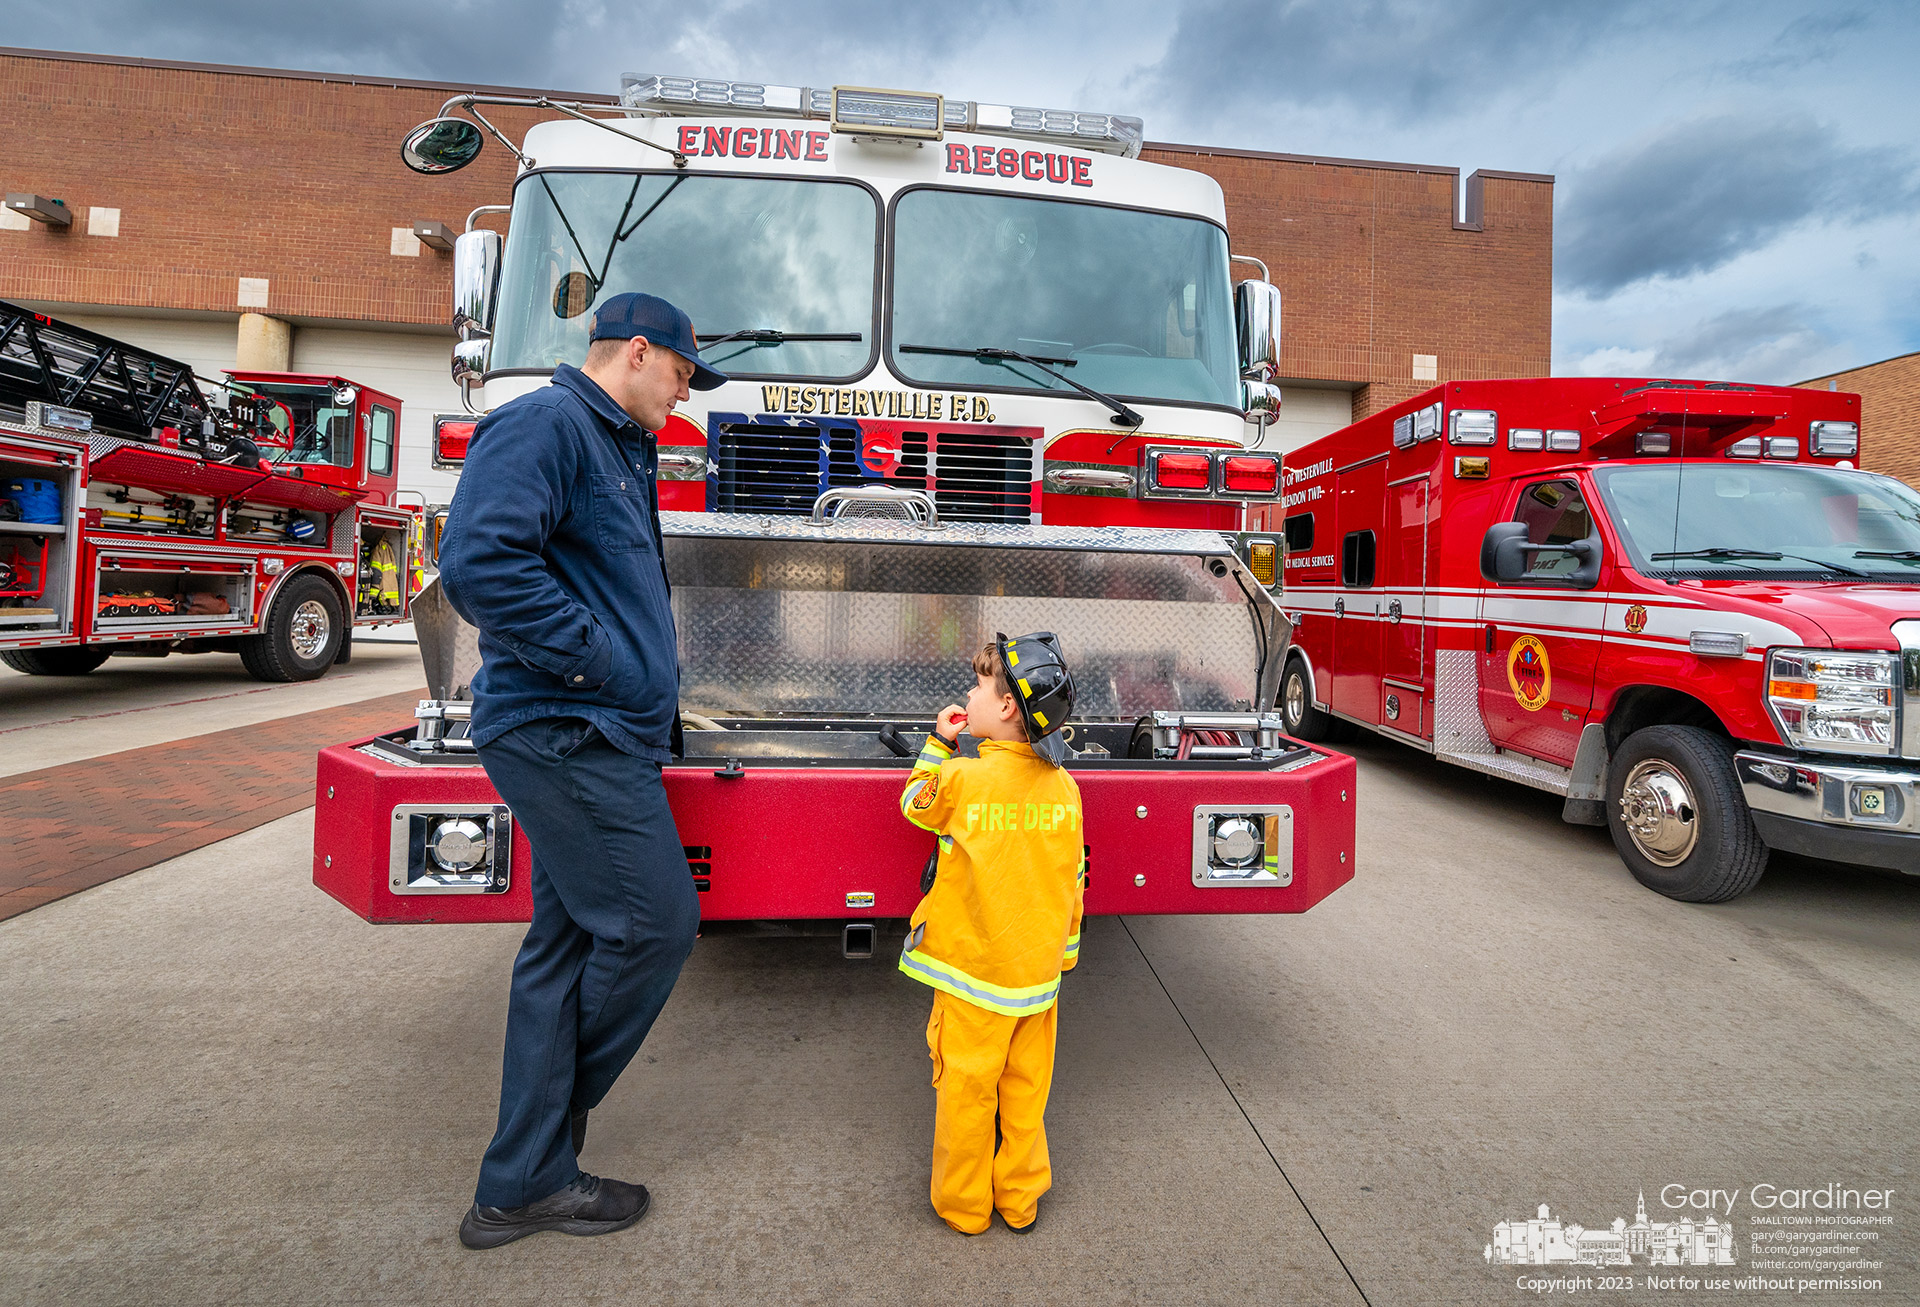 A Westerville firefighter talks with a young boy about the same age as his son during the fire department's open house at the main fire station on West Main St. My Final Photo for October 8, 2023.